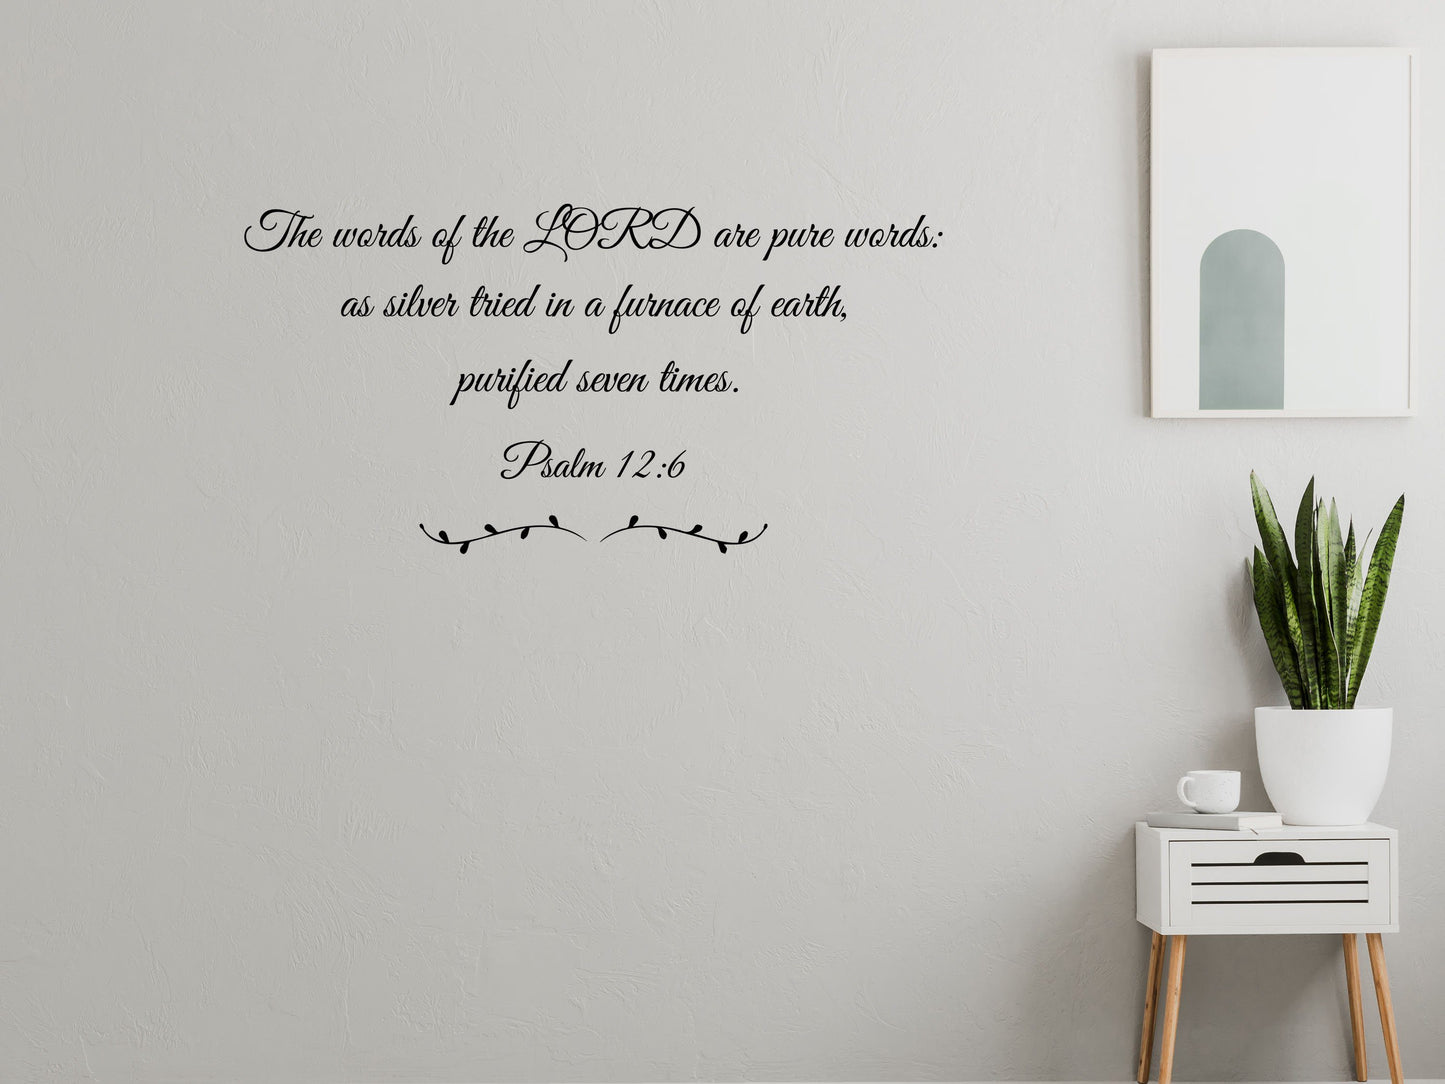 Psalm 12:6 Bible Verse Wall Decal, Bible Wall Art, Decals for Walls, Wall Stickers, Psalm Wall Decal Vinyl Wall Decal Done 